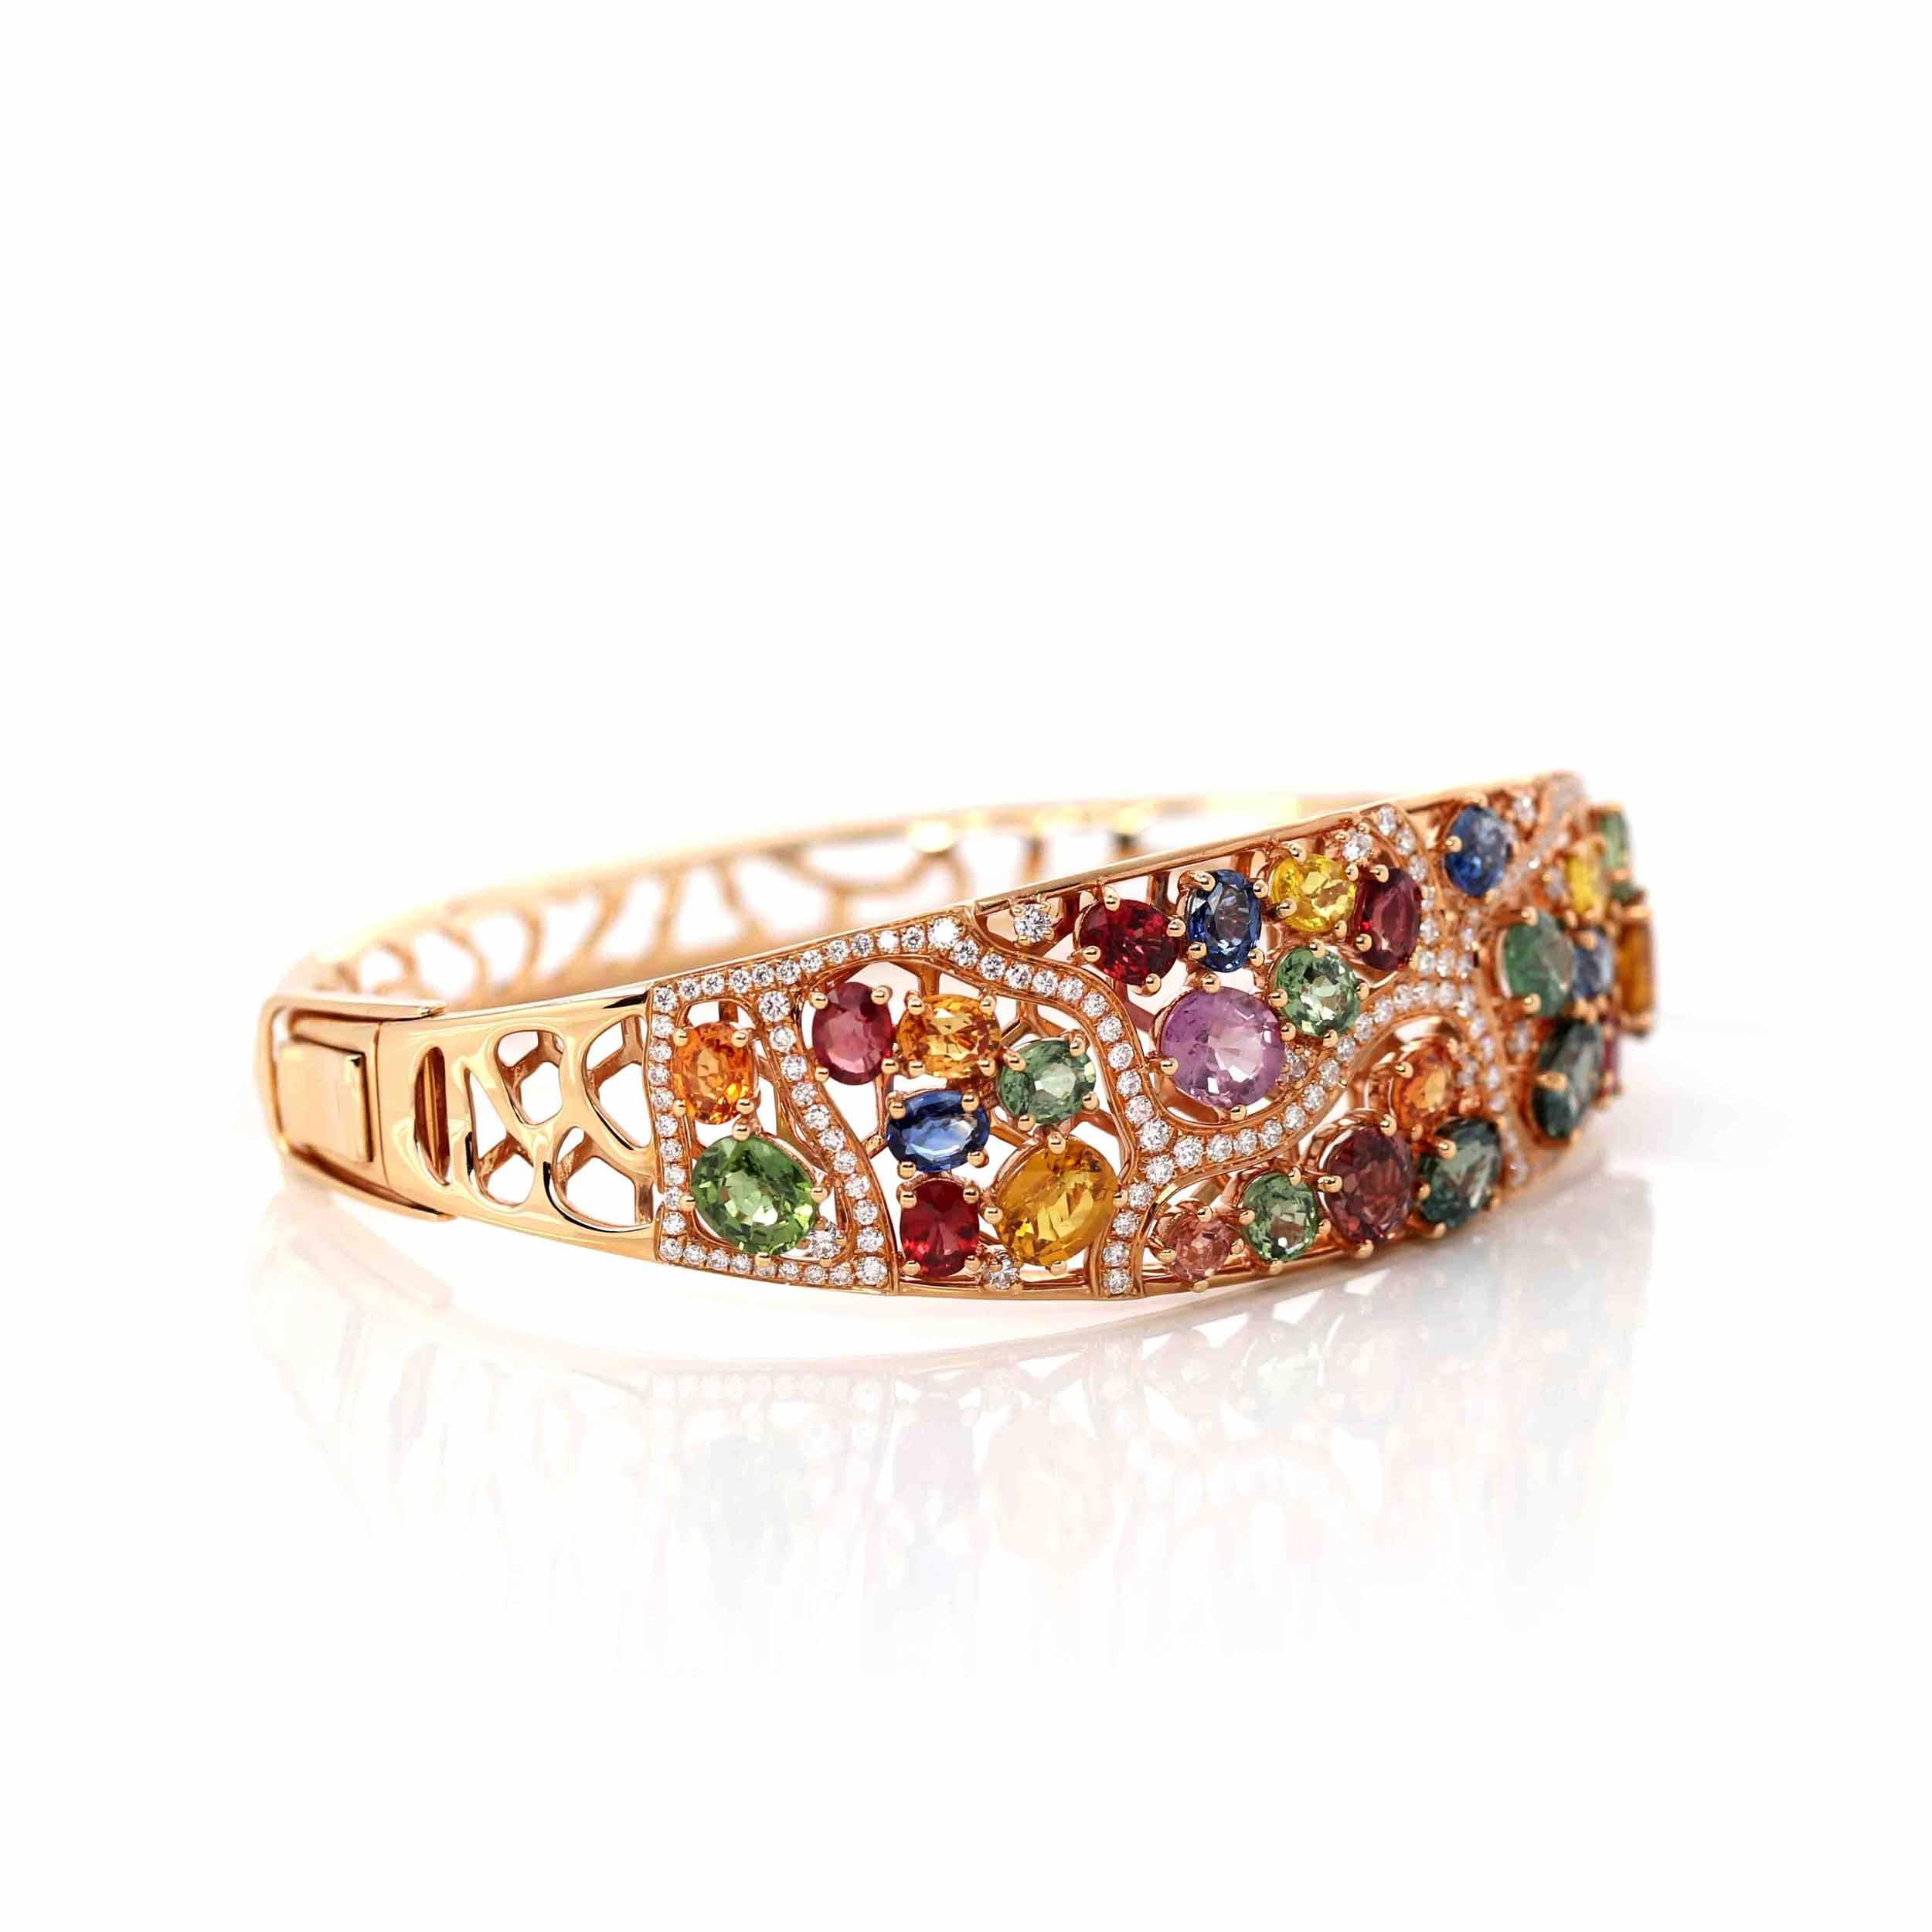 * DESIGN CONCEPT--- The design inspired by the dazzling colors of natural sapphires. The bangle is one of a kind, the stones are custom hand picked for this bracelet. Totaling 12.981ct of individual multi-colored sapphire. 4 prong setting. Alongside